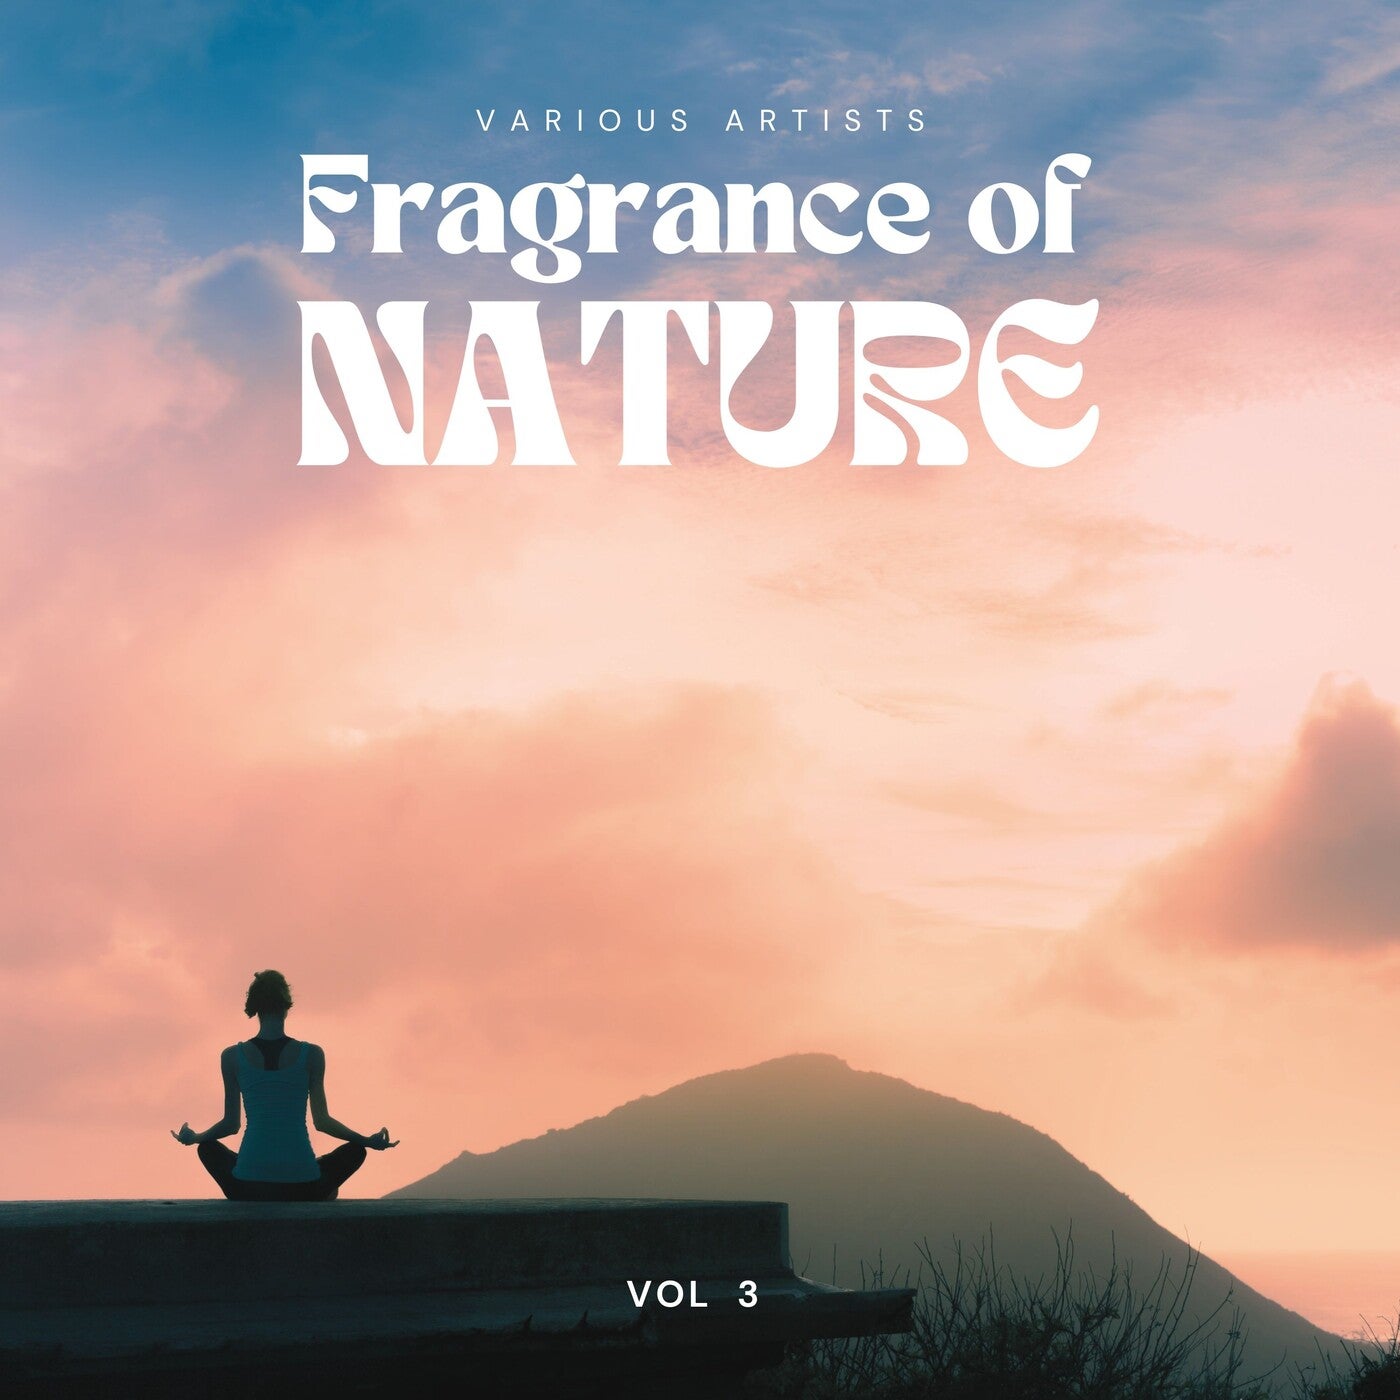 Fragrance of Nature, Vol. 3